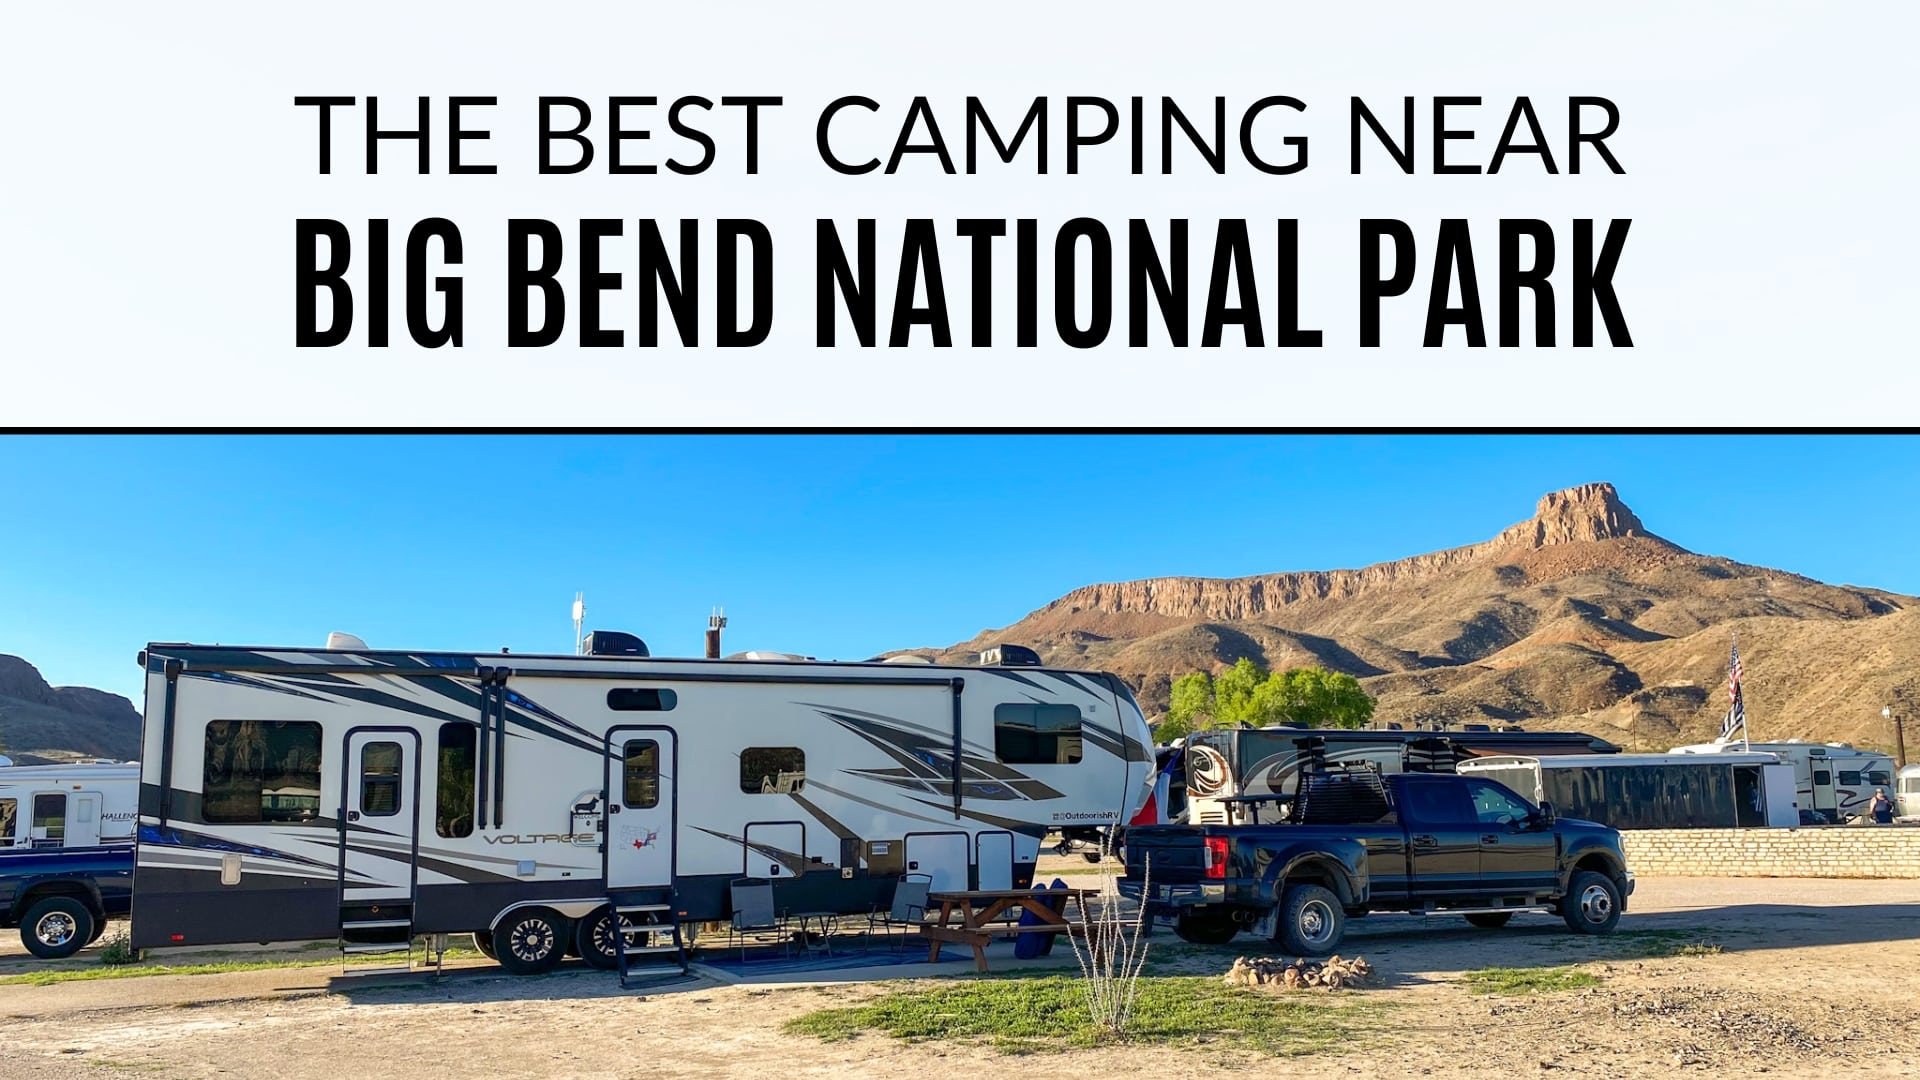 Fifth wheel parked at Maverick Ranch RV with Lajitas mesa in the background. Text on the image says "the best camping near big bend national park"